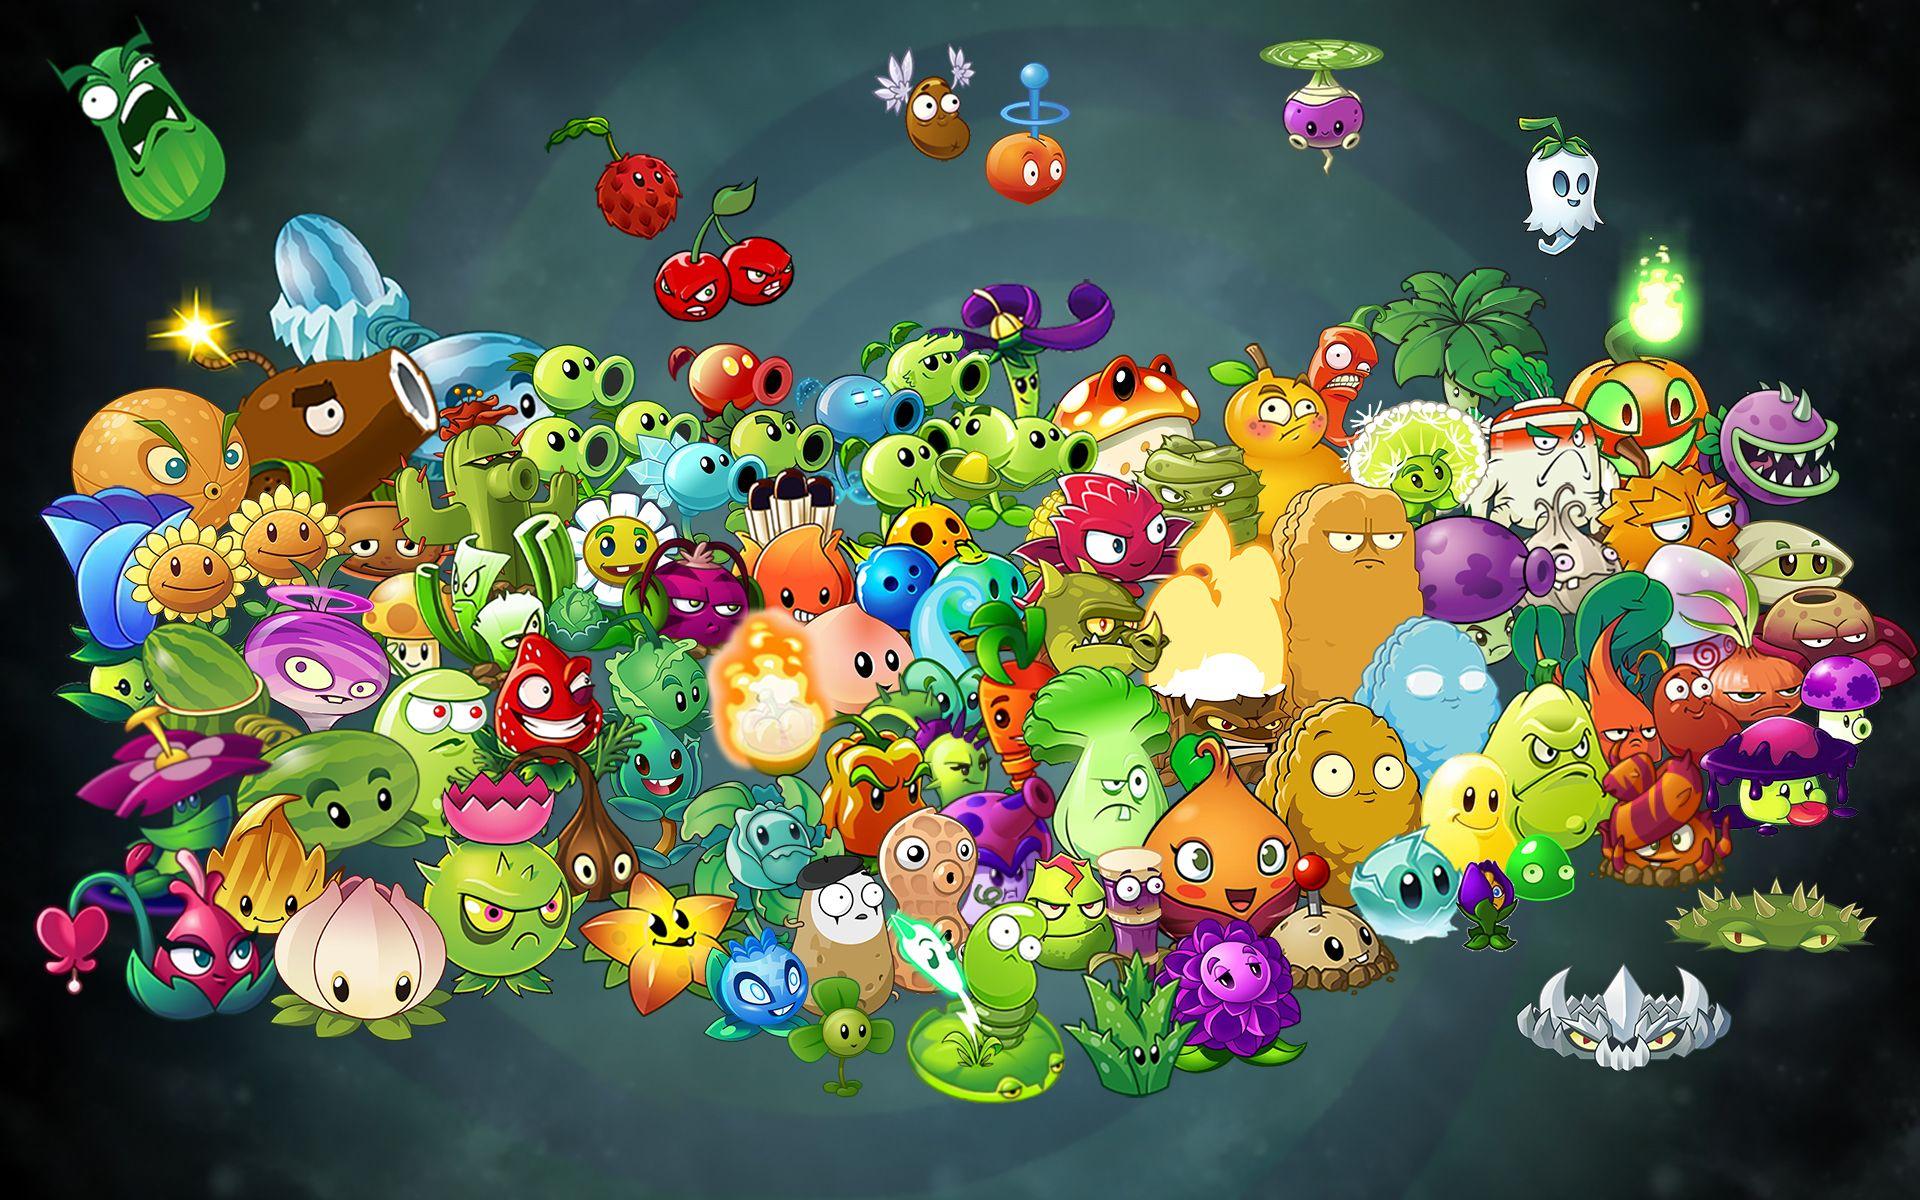 plants vs zombies download free pc full version